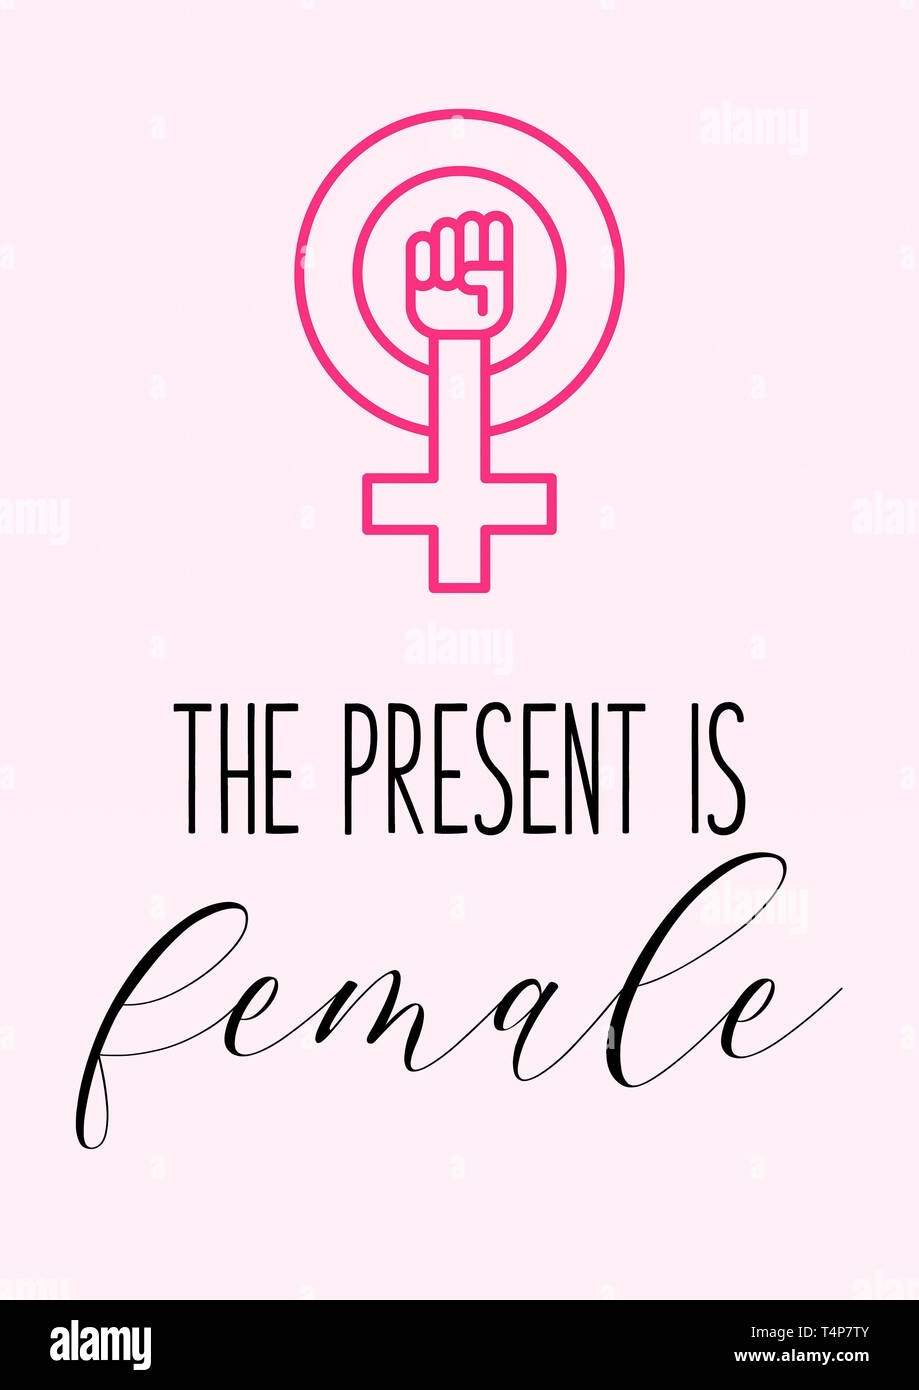 The present is female. Girl power sign. Feminist quotes. Stock Photo